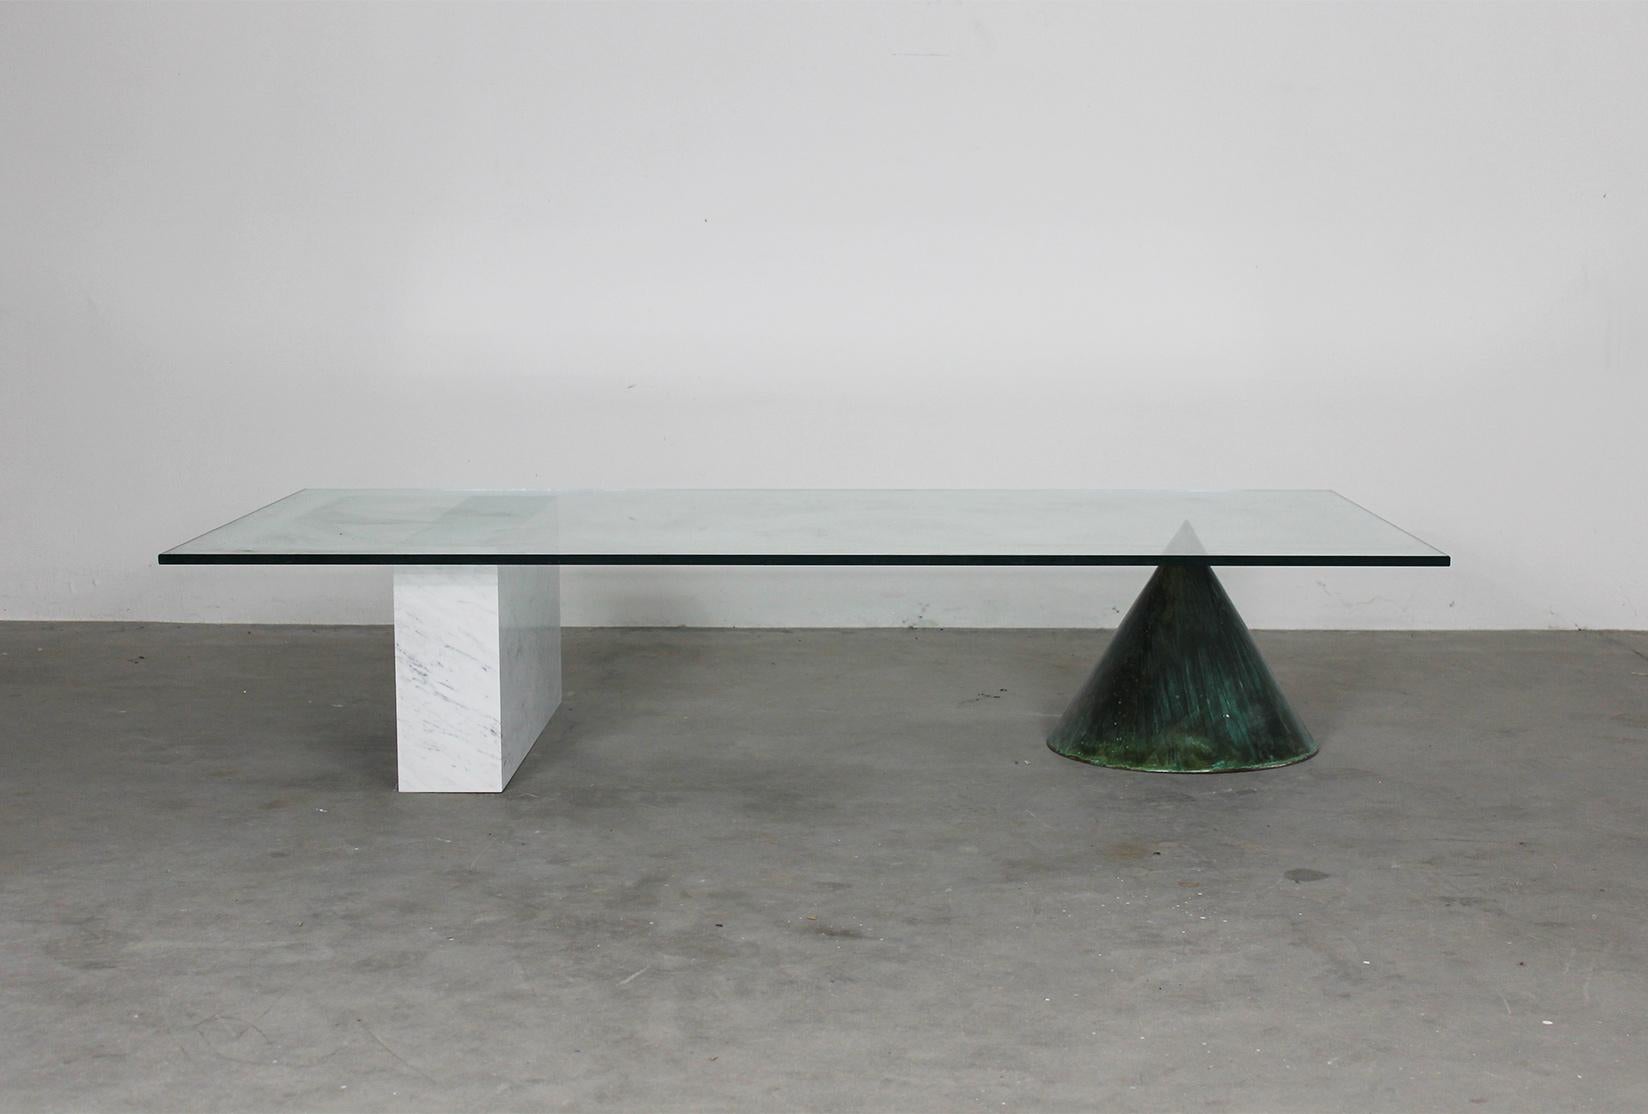 Kono coffee table designed by Massimo Vignelli and manufactured by Casigliani in 1980s.
Low table with supports in oxidized copper and white Carrara marble and ground glass on top.
